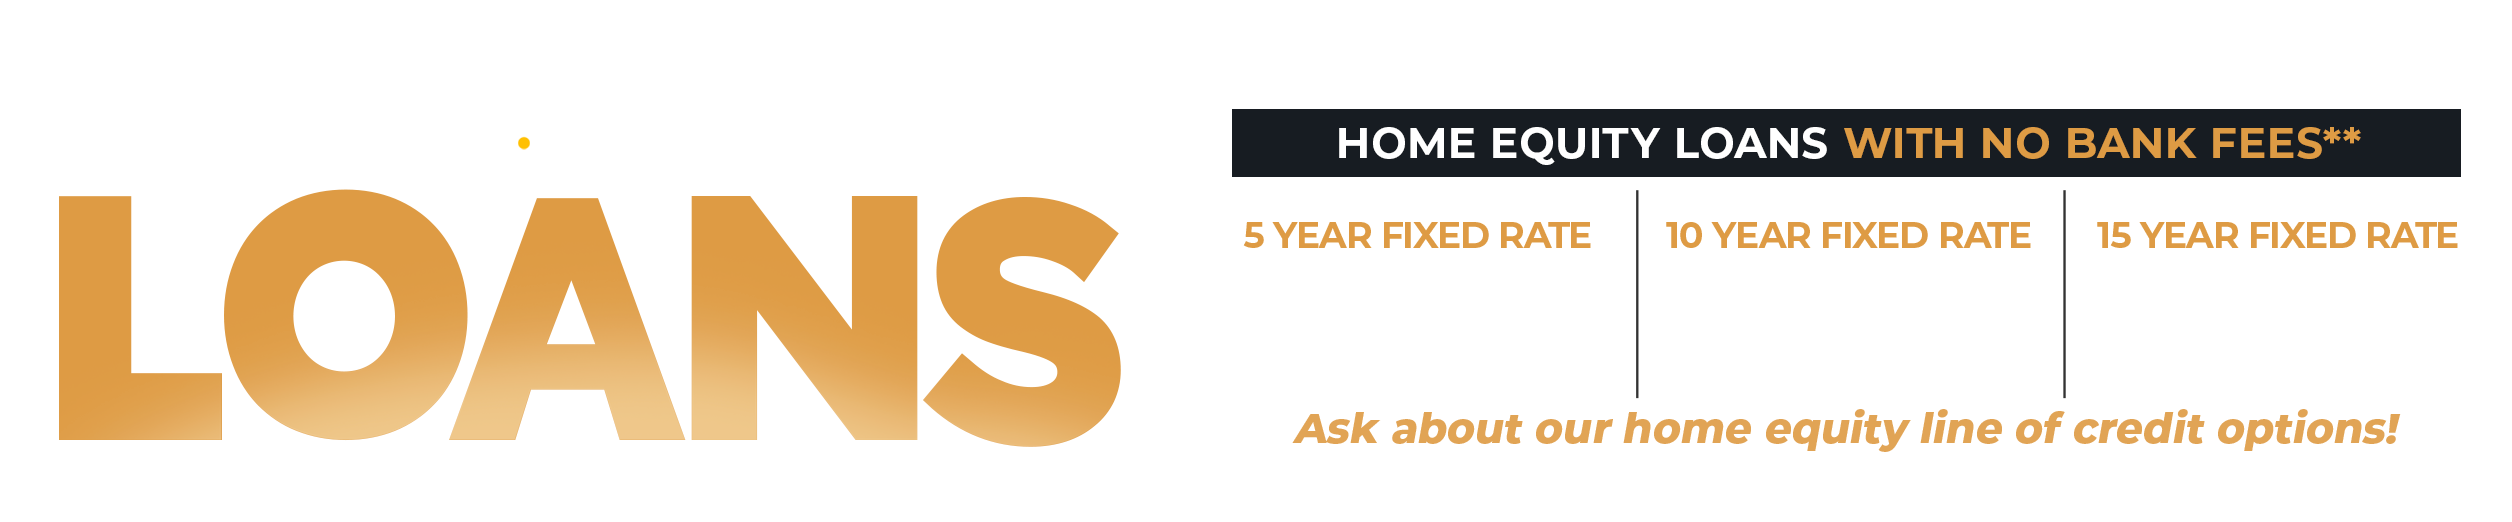 home equity loans banner